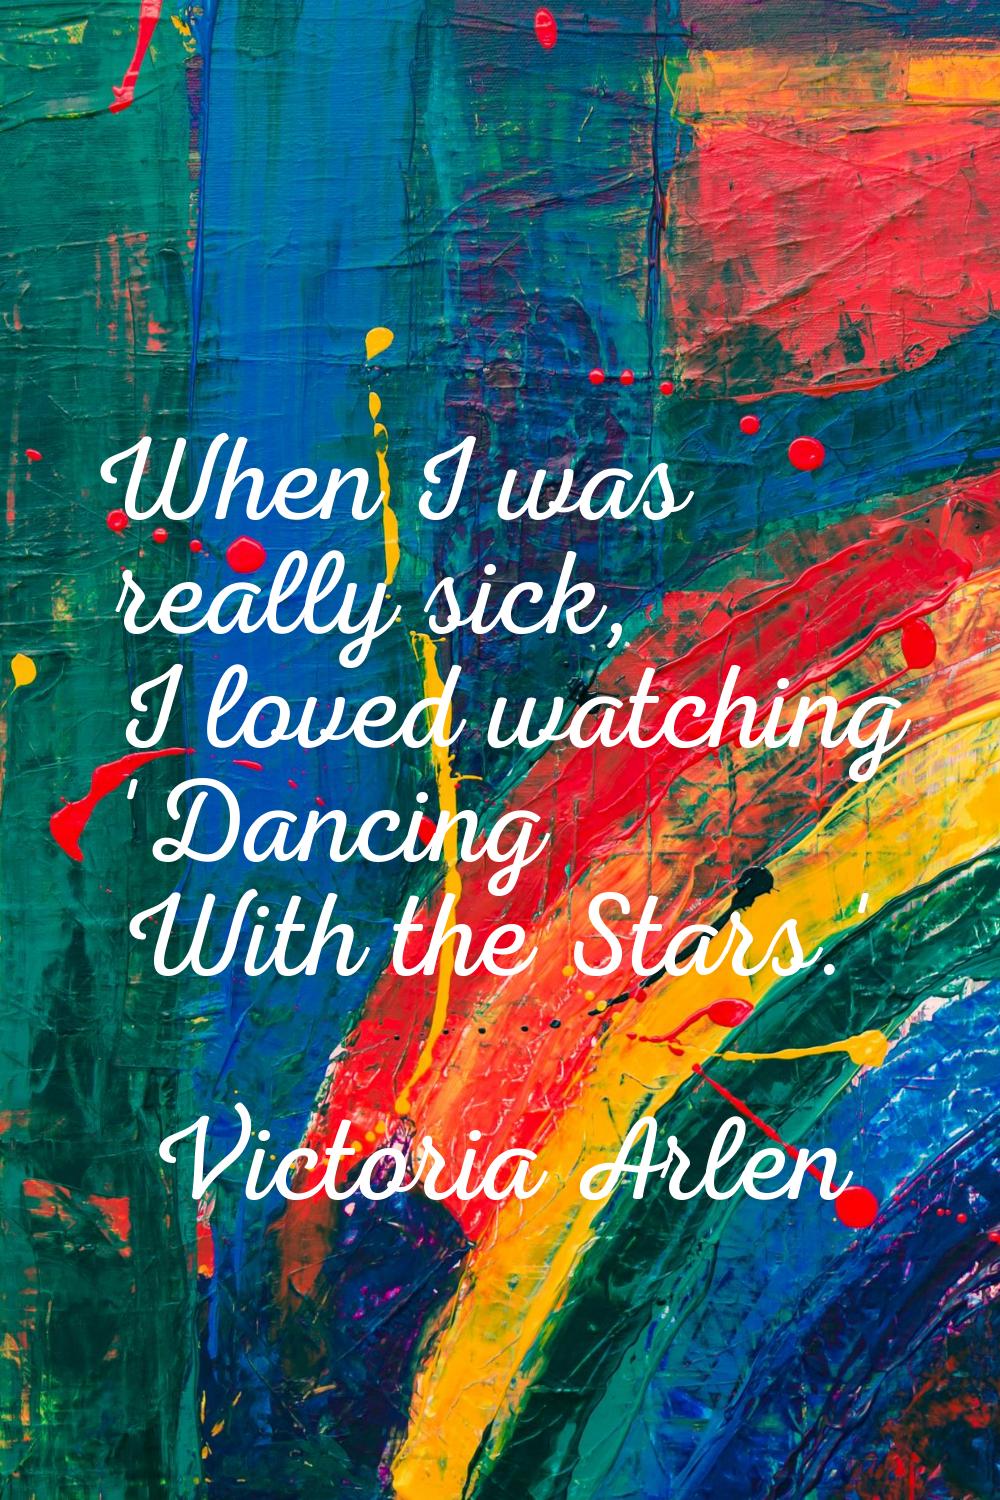 When I was really sick, I loved watching 'Dancing With the Stars.'